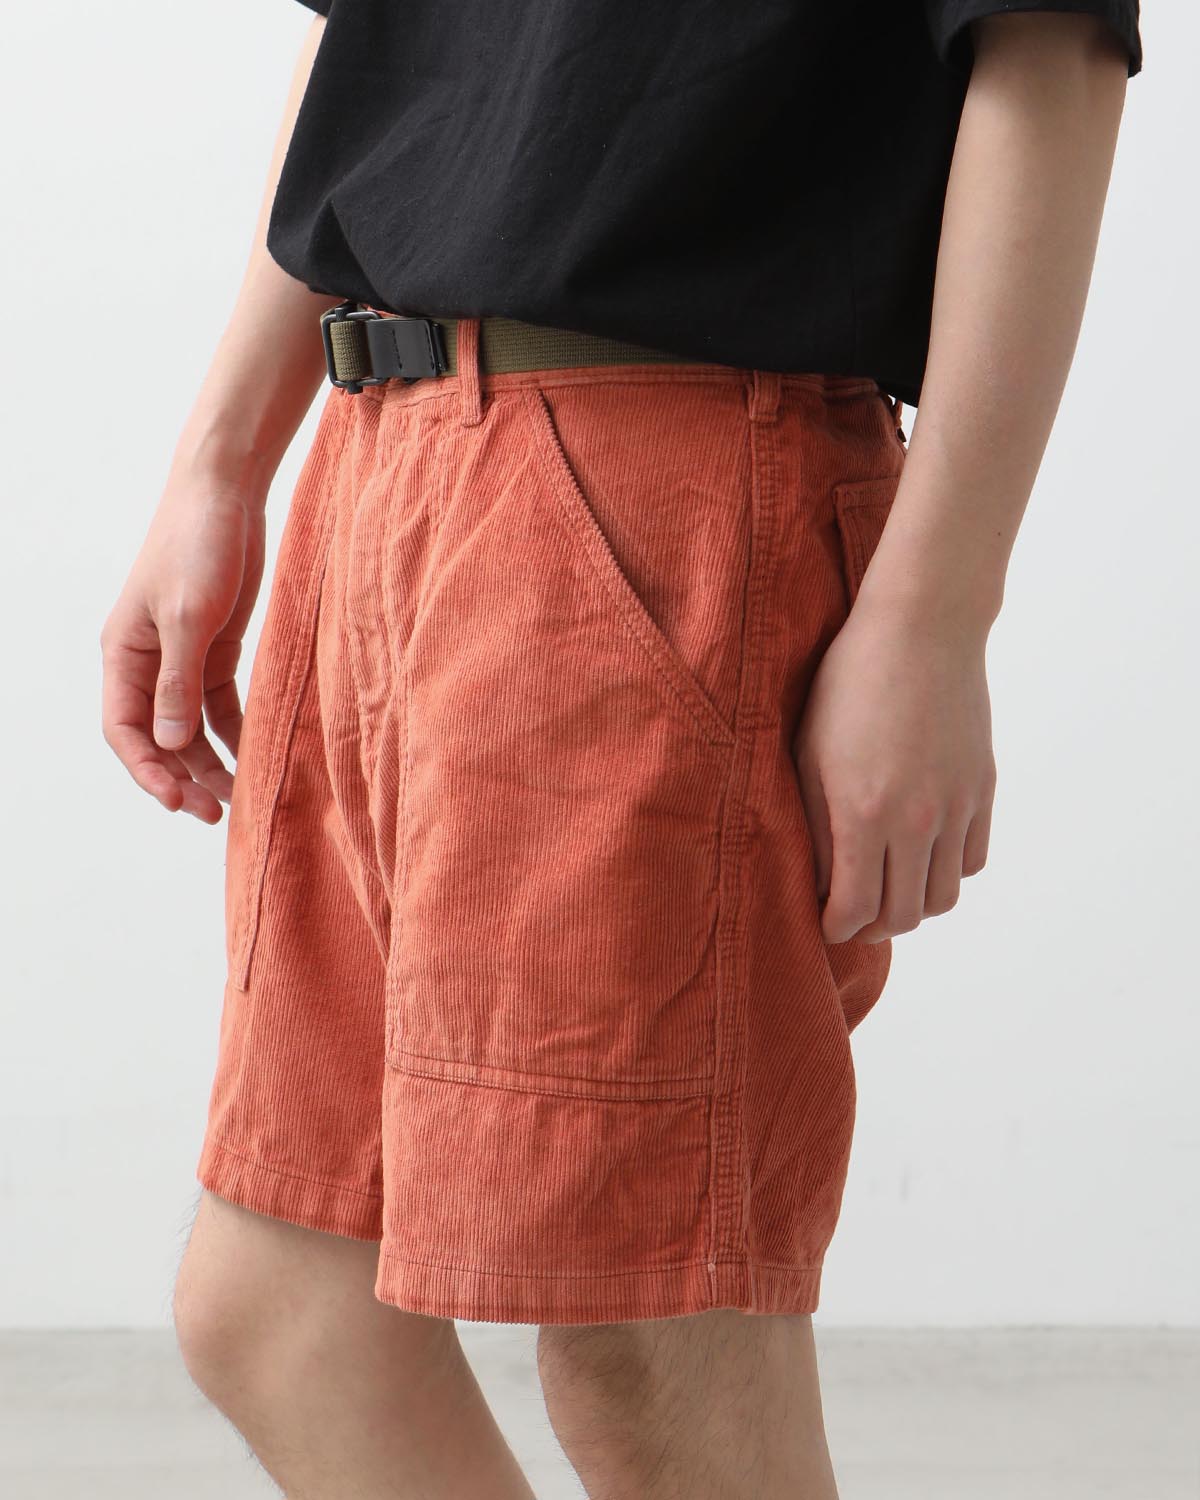 M'S ORGANIC COTTON CORD UTILITY SHORTS - 6 IN.